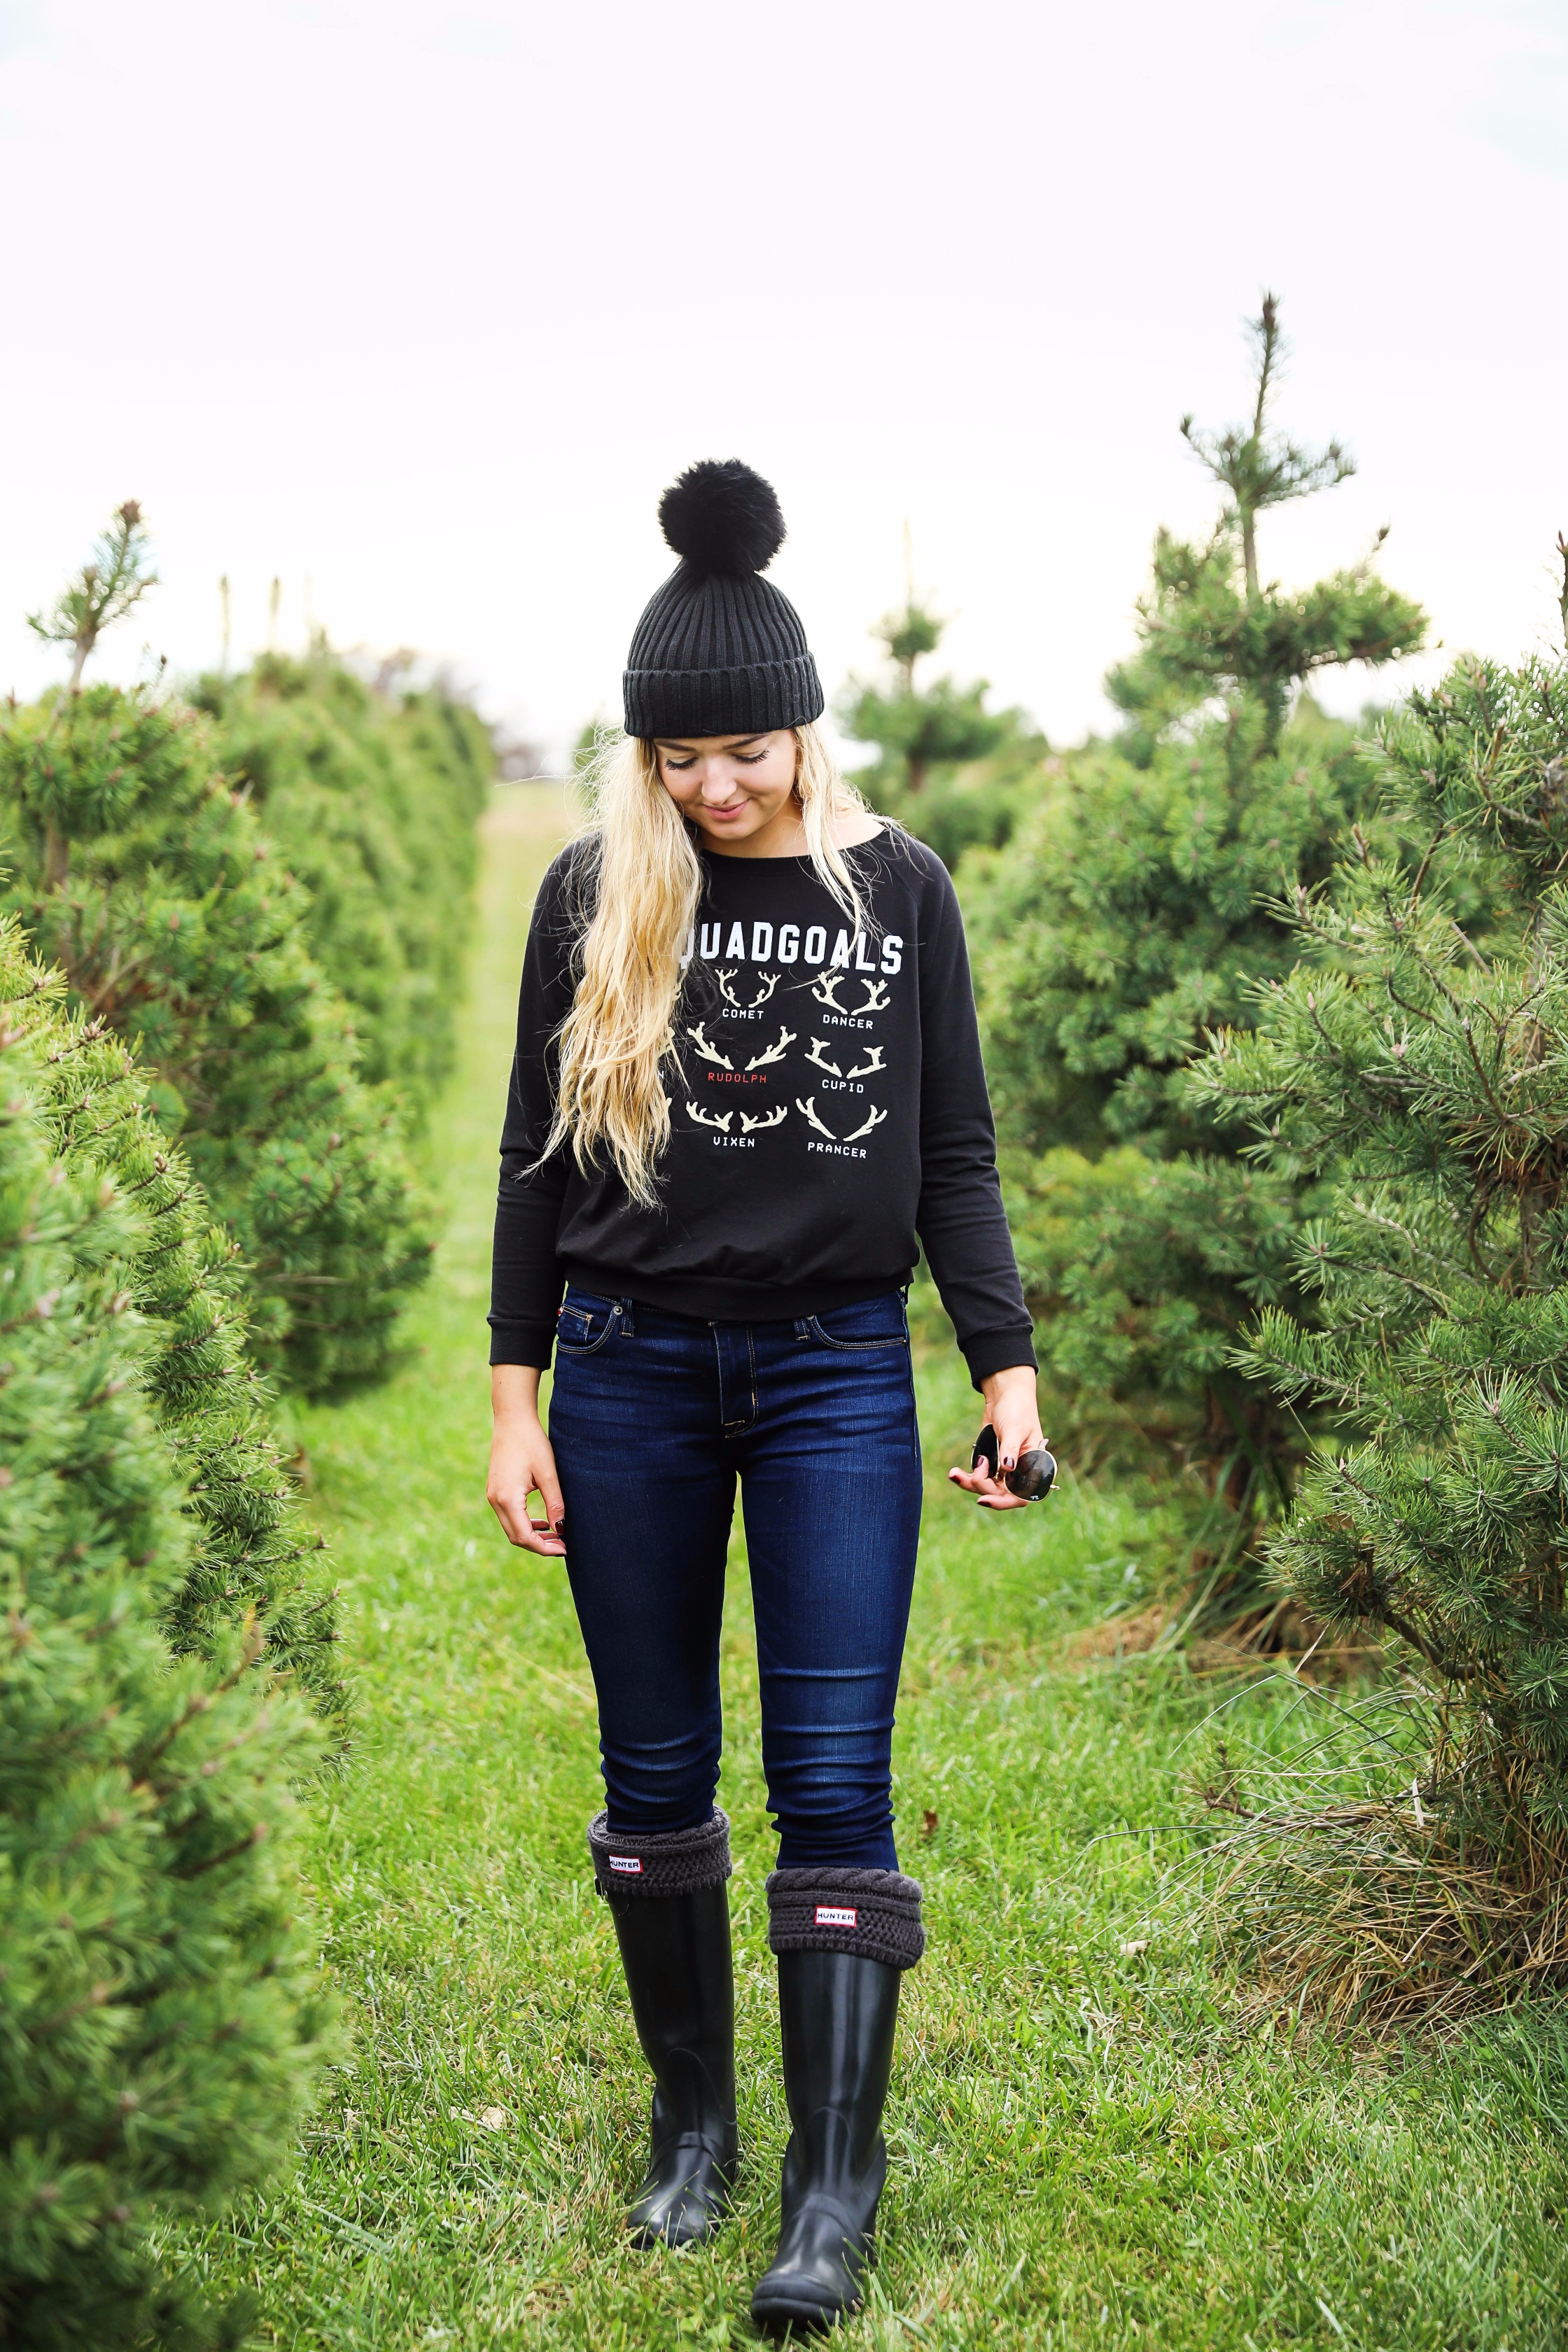 Christmas tree farm outfit idea! Squad goals with the reindeers shirt! Details on fashion blog daily dose of charm by lauren lindmark